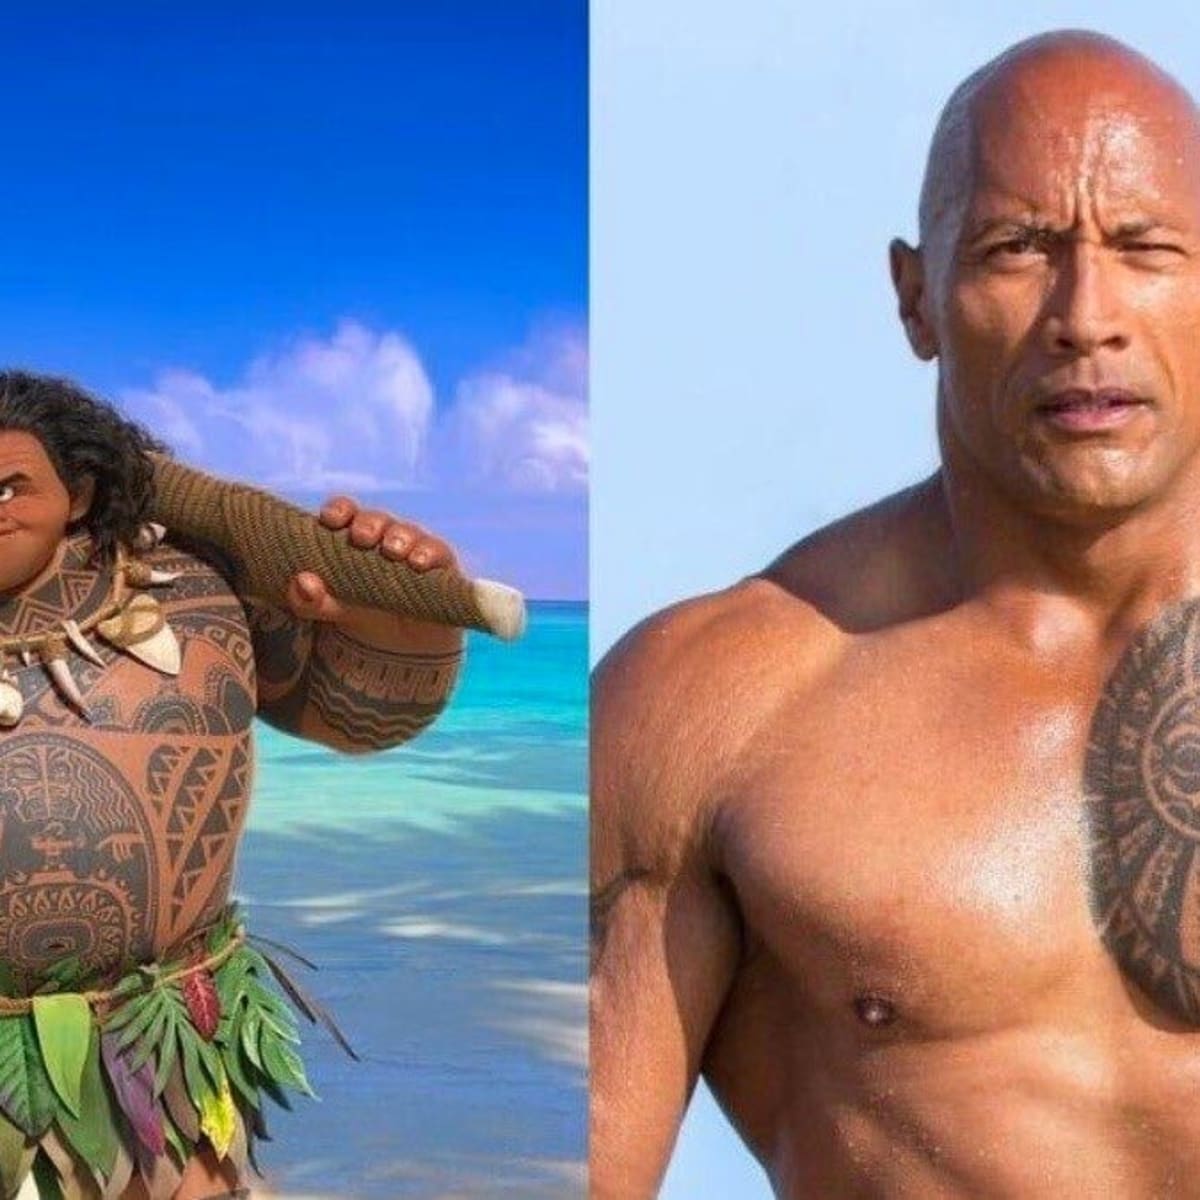 LodiX on Twitter Do the tattoos for Disneys Moana reminds any of you of  Hercules muses and the vases httpstcoQXCGGfl8bA  X